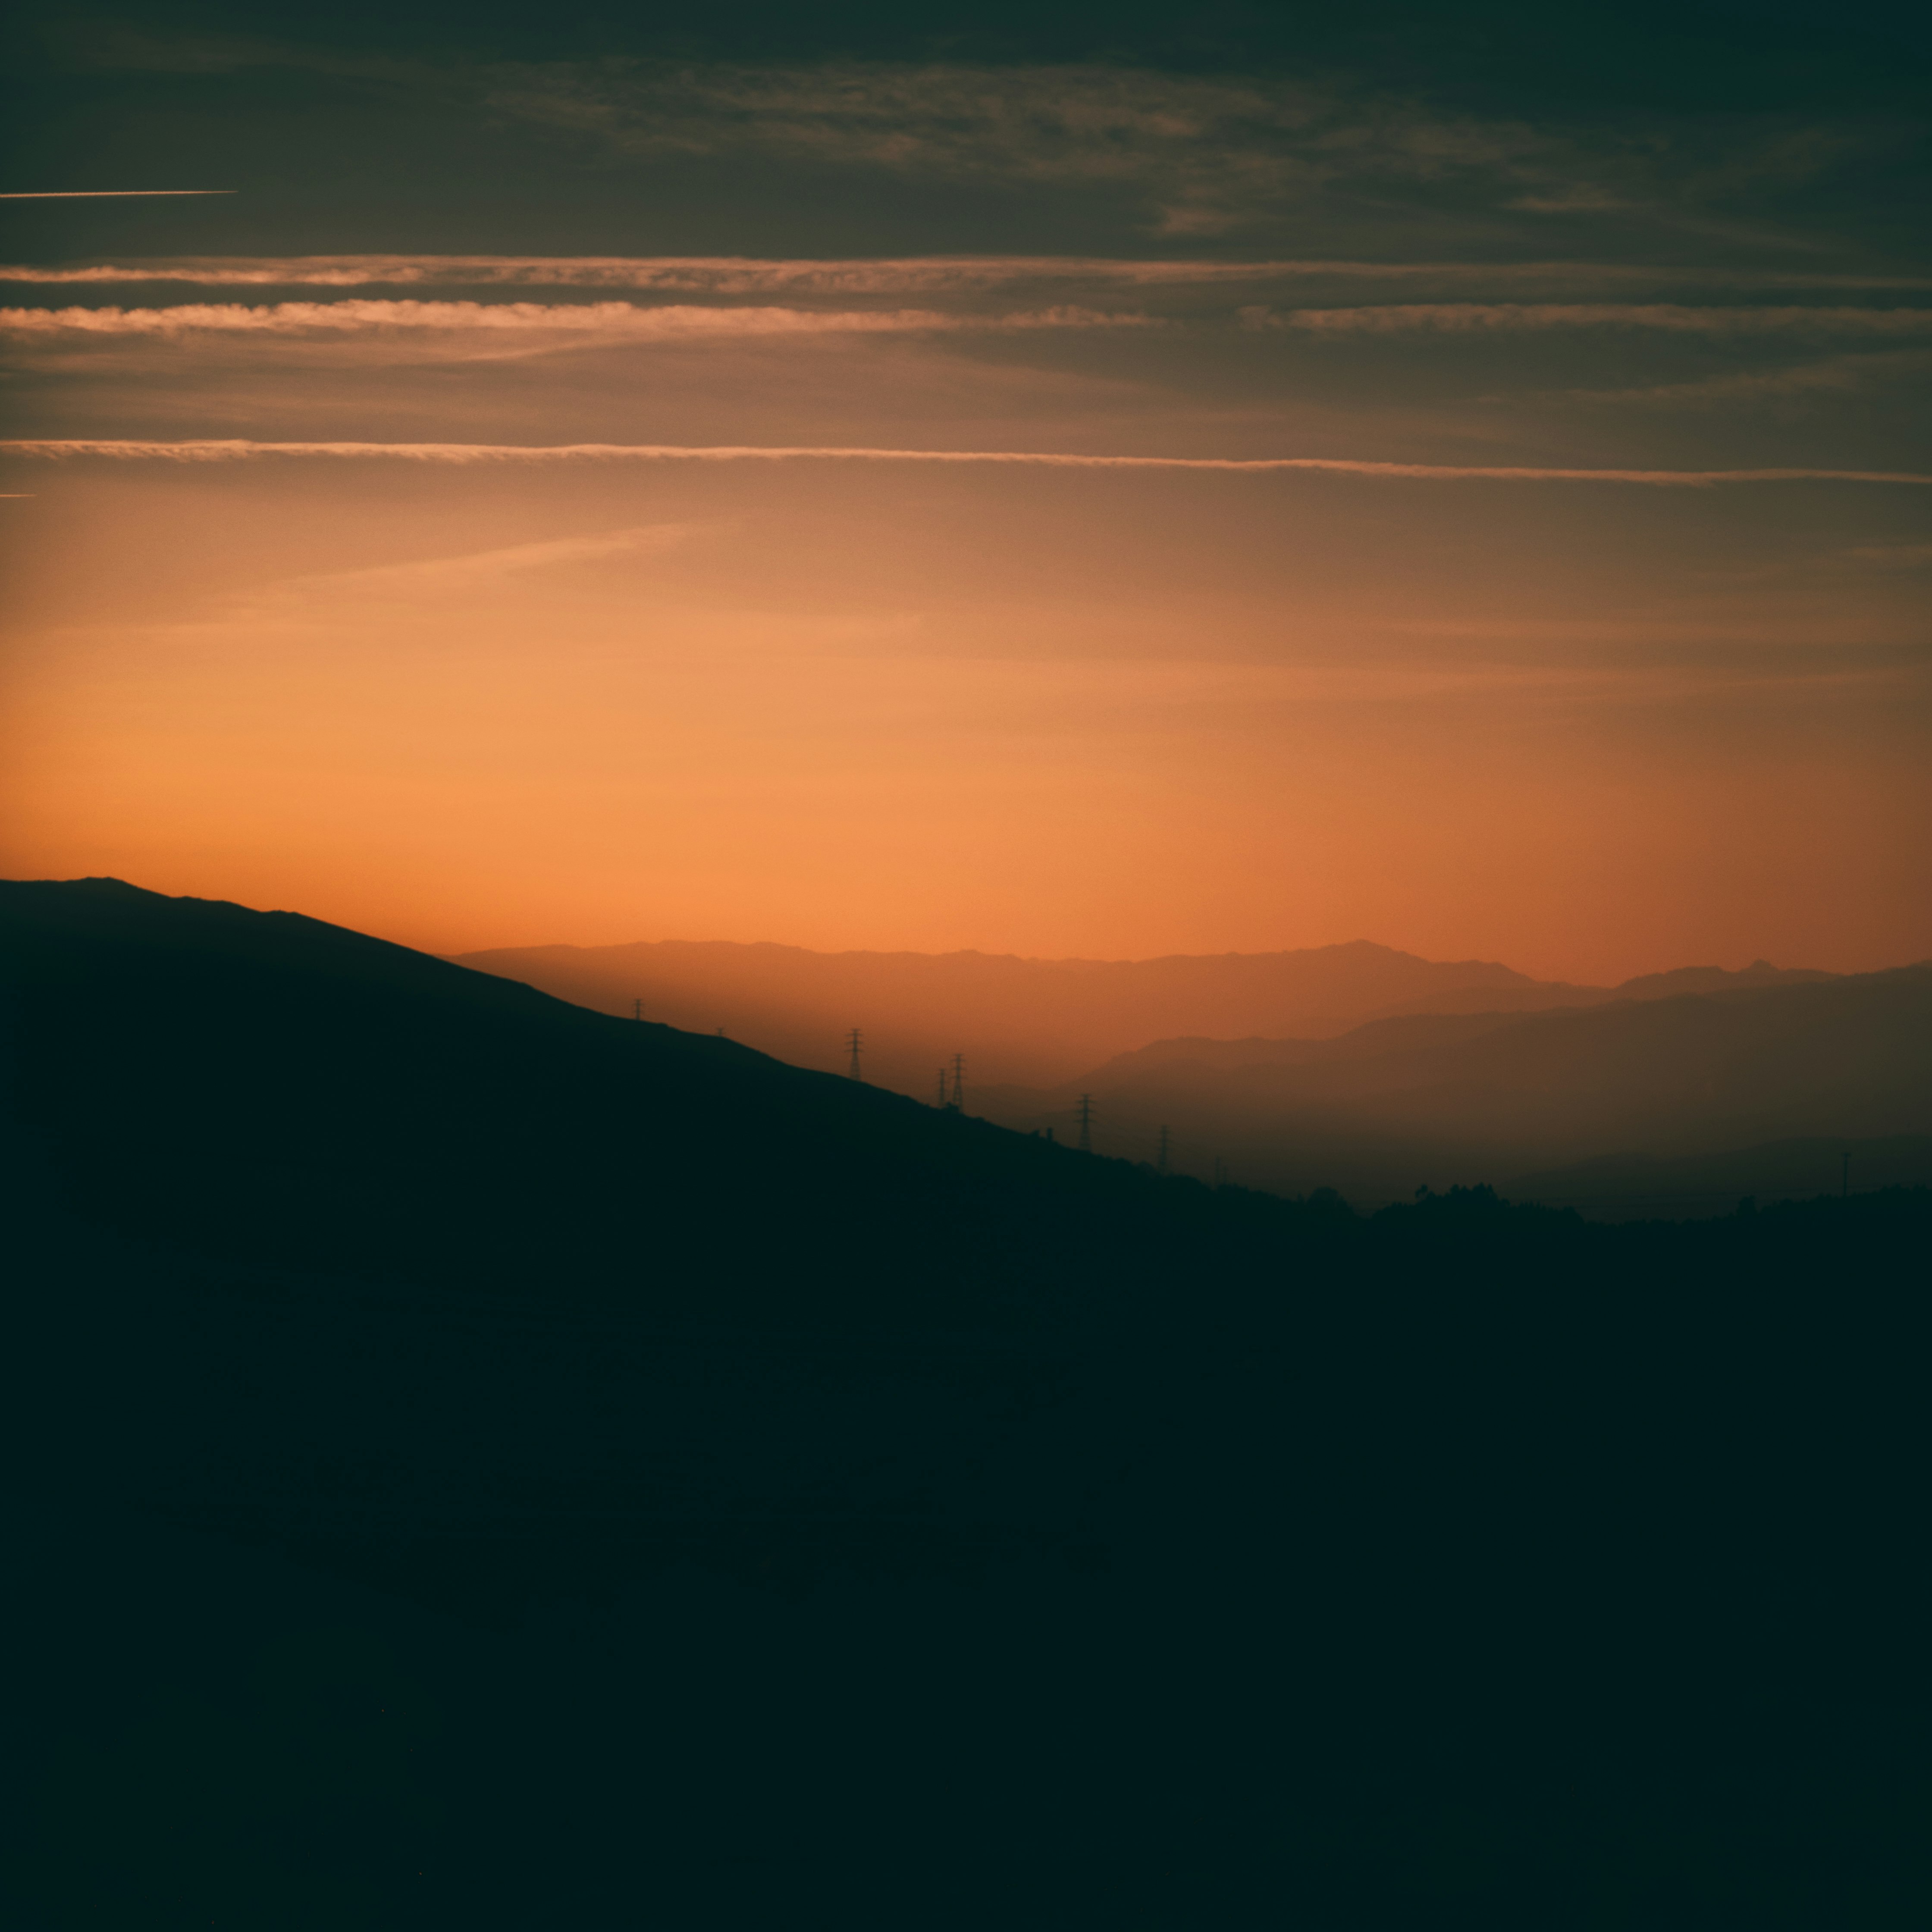 silhouette of mountain under orange and gray skies